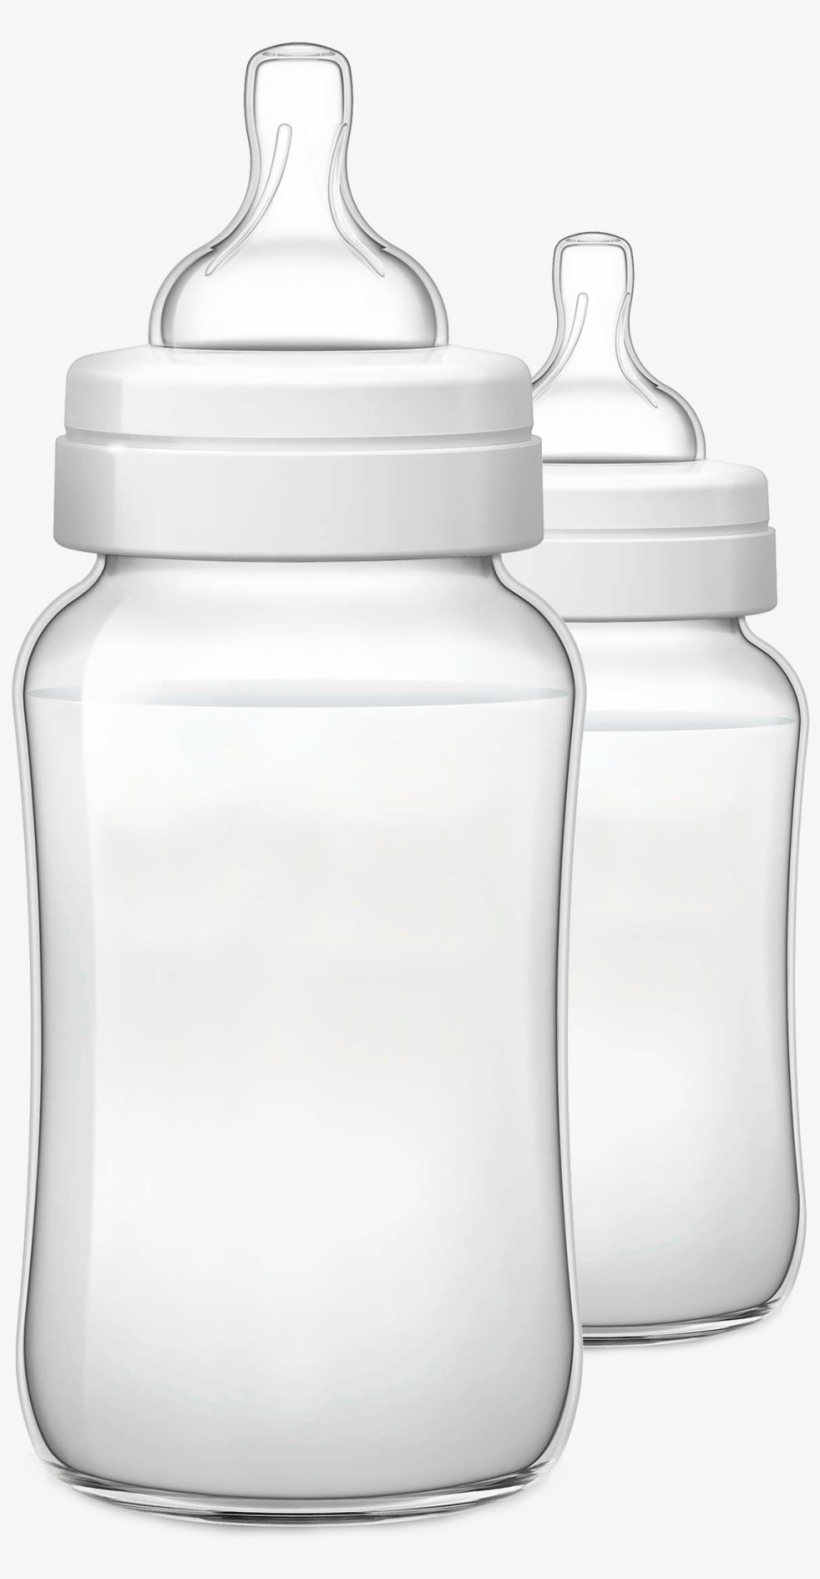 Png Black And White Philips Avent Infant Child Colic - Baby Bottle, transparent png #1143146